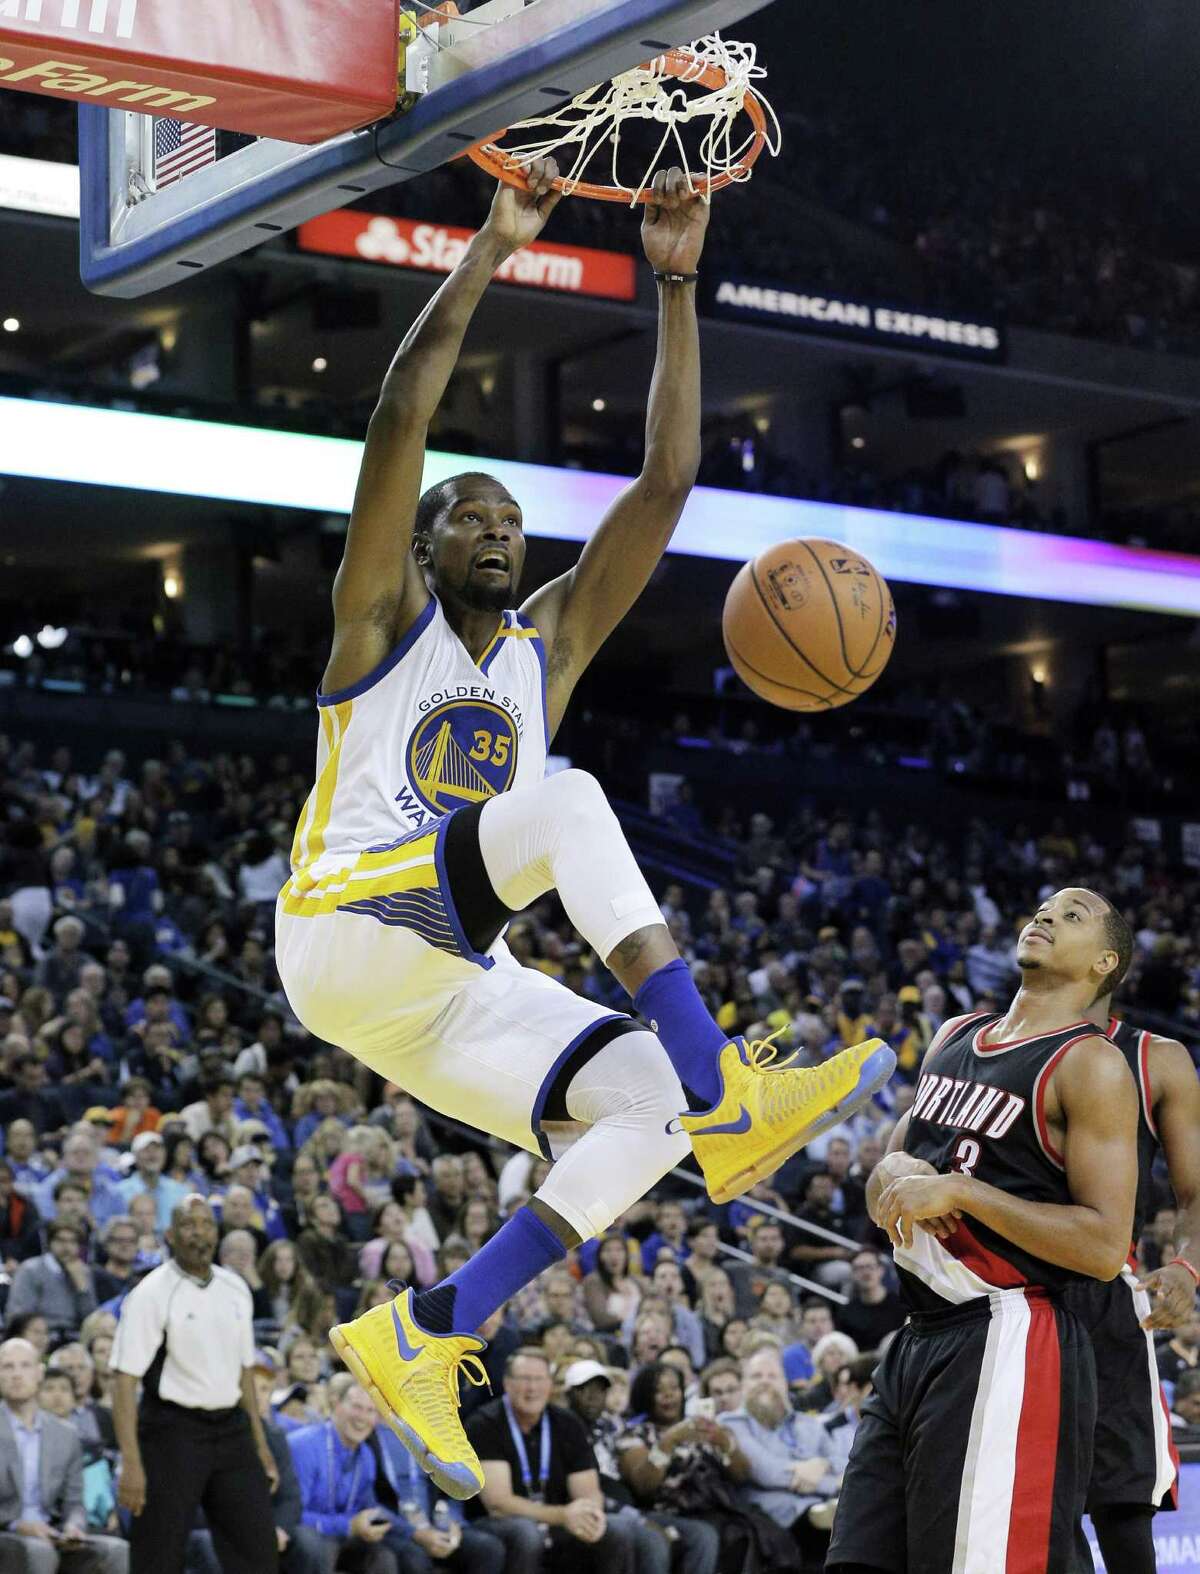 Kevin Durant (35) dunks during the first half as the Warriors played the Portland Trail Blazers during a preseason game at Oracle Arena on Oct. 21, 2016, in Oakland, Calif.